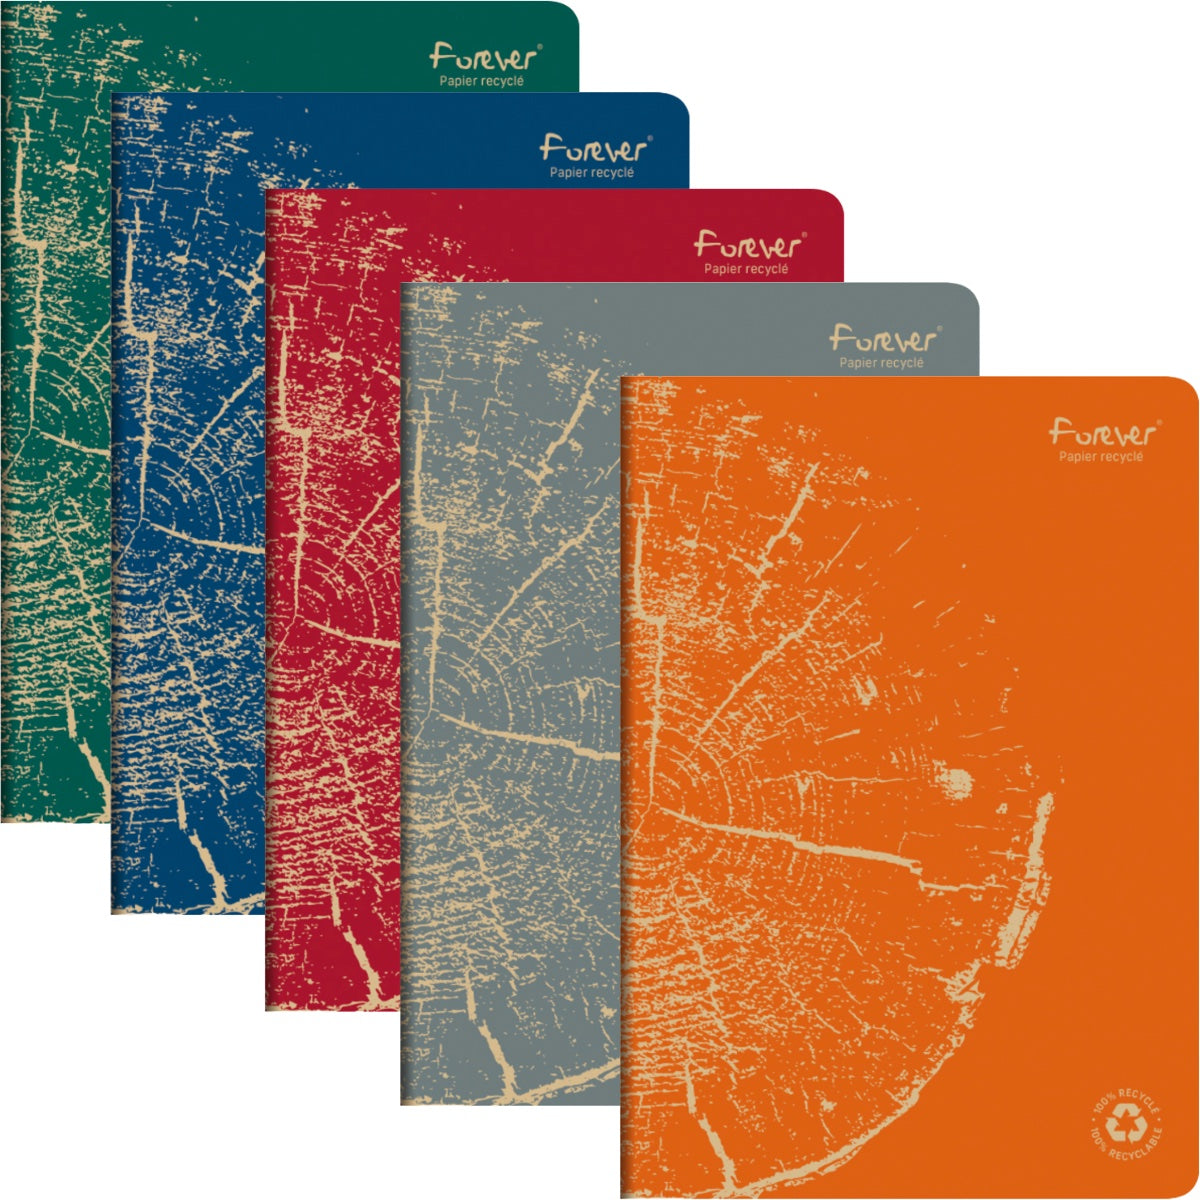 Clairefontaine Forever Premium 100% Recycled Notebook A4, Staplebound, Lined, 90gsm, 96/pages, Assorted Colors